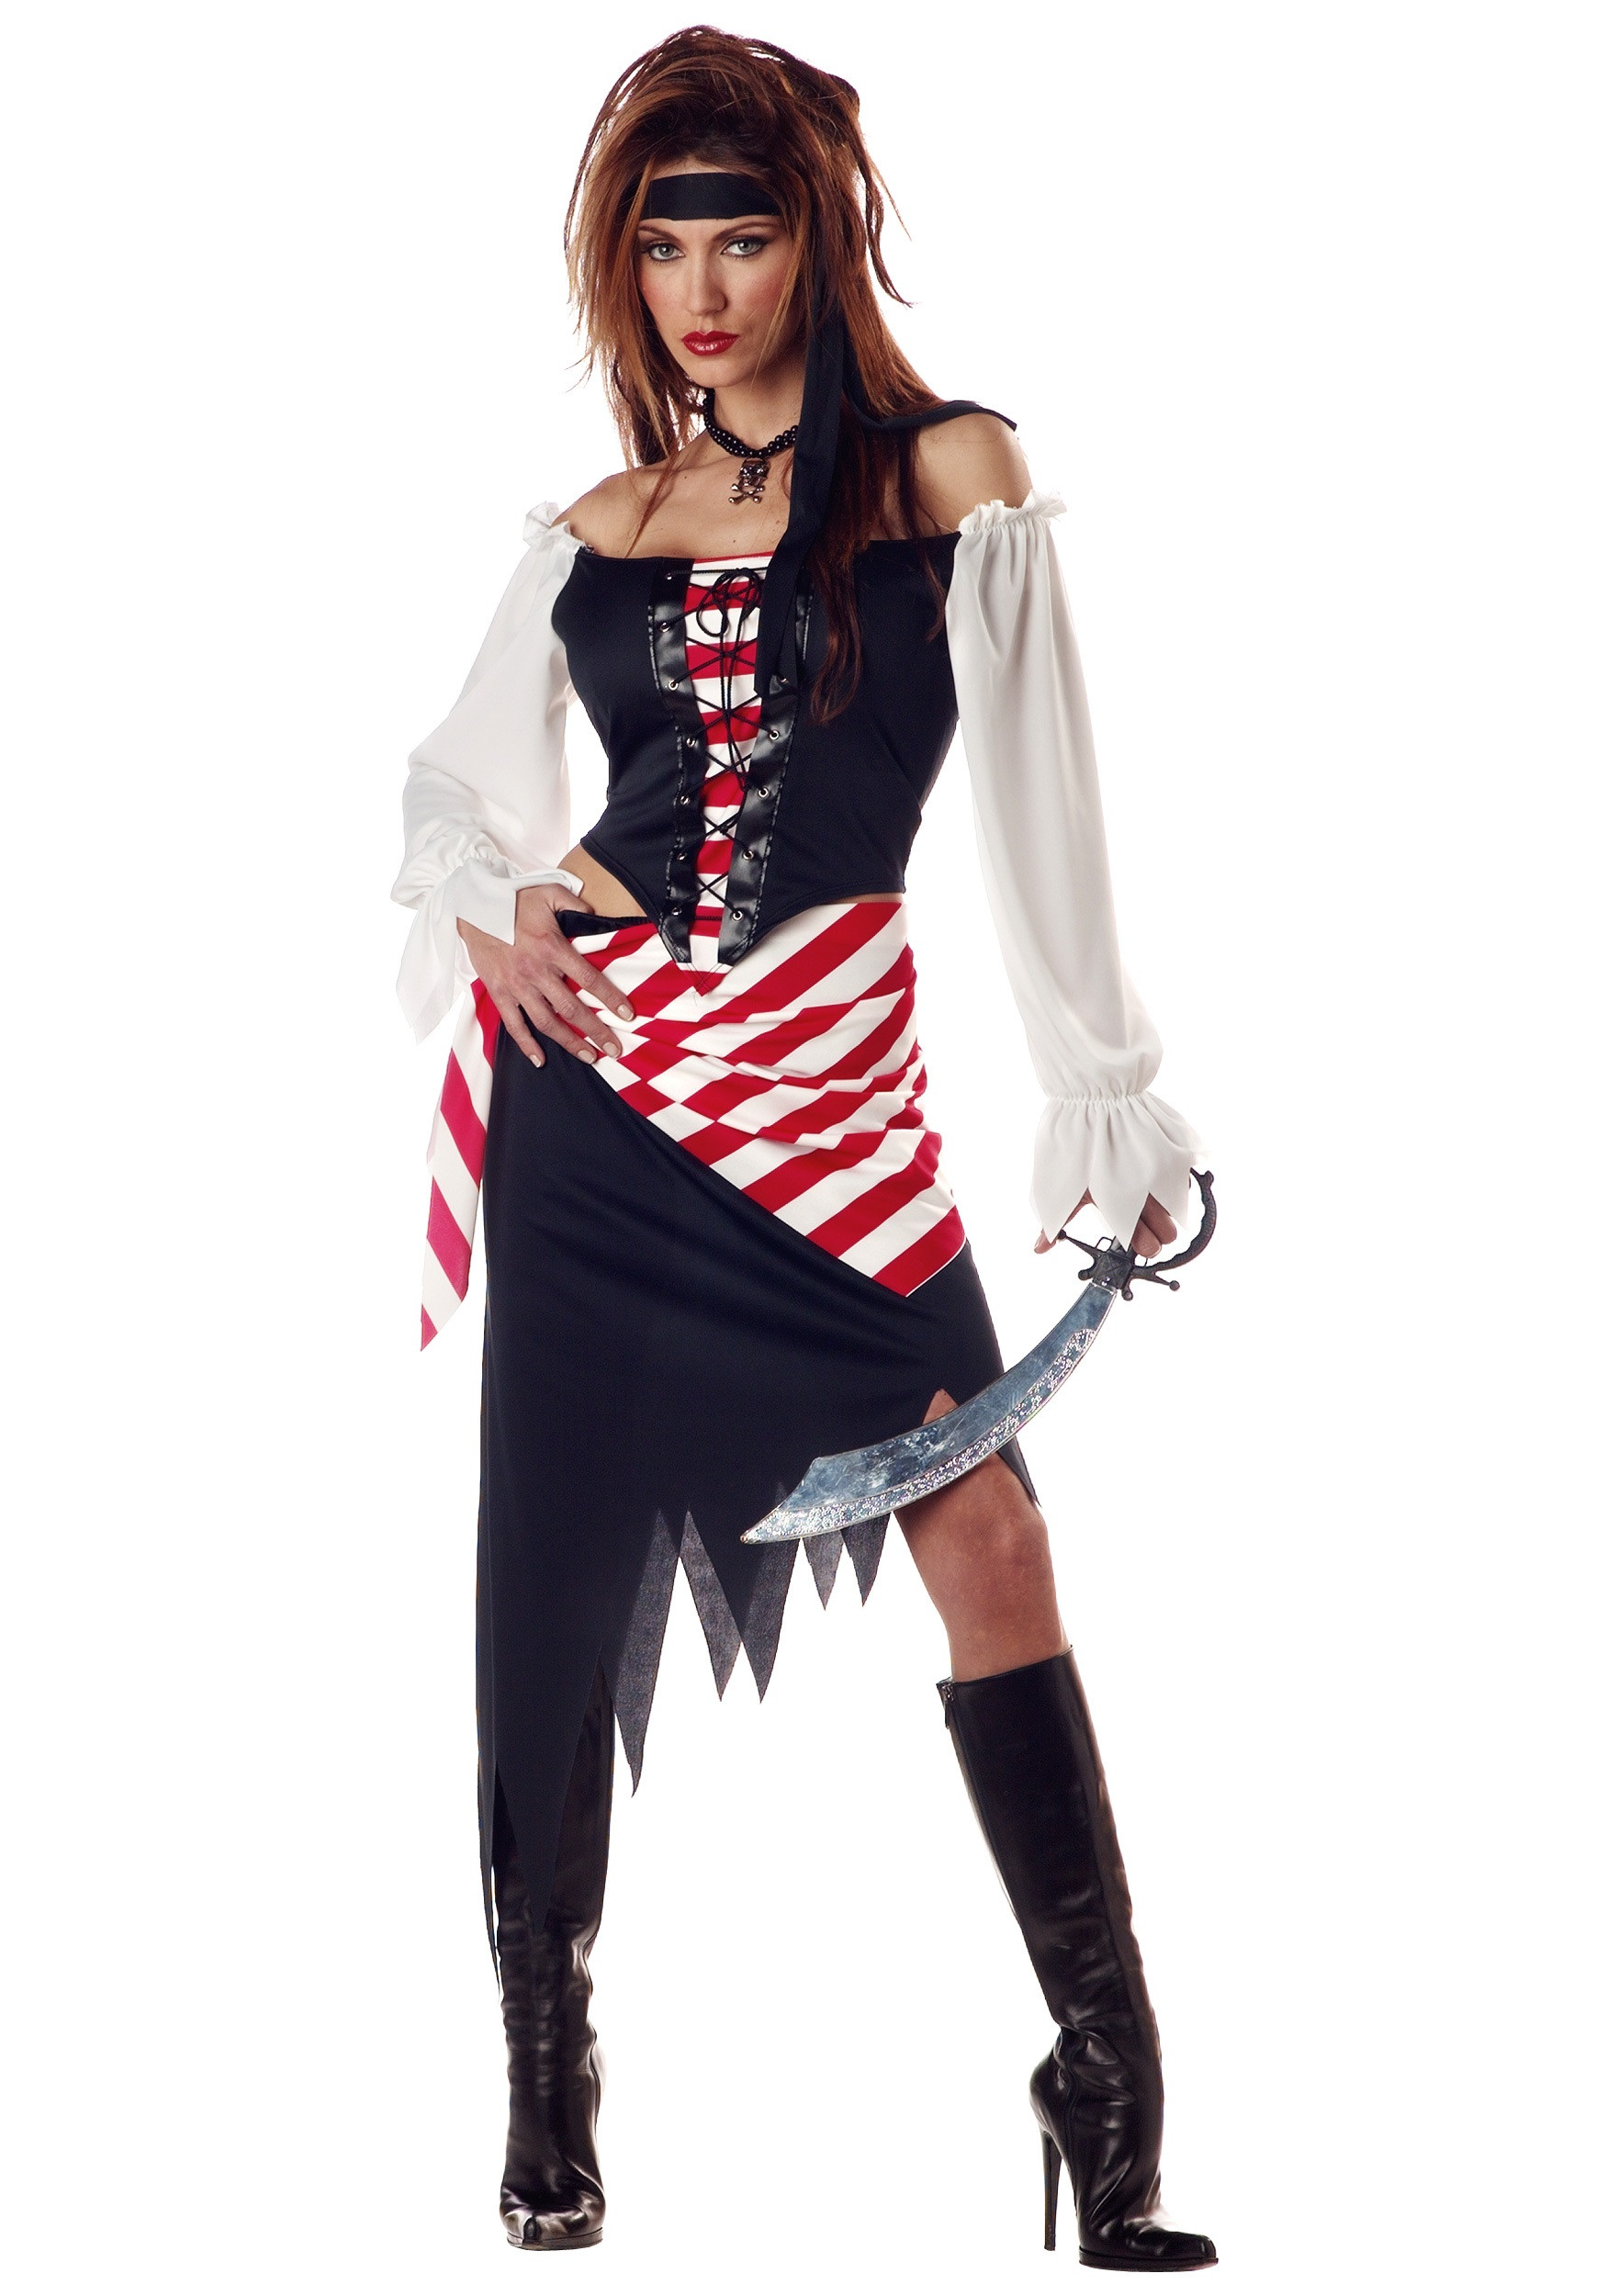 Women DIY Costumes
 Adult Ruby the Pirate Beauty Costume La s Pirate Costumes